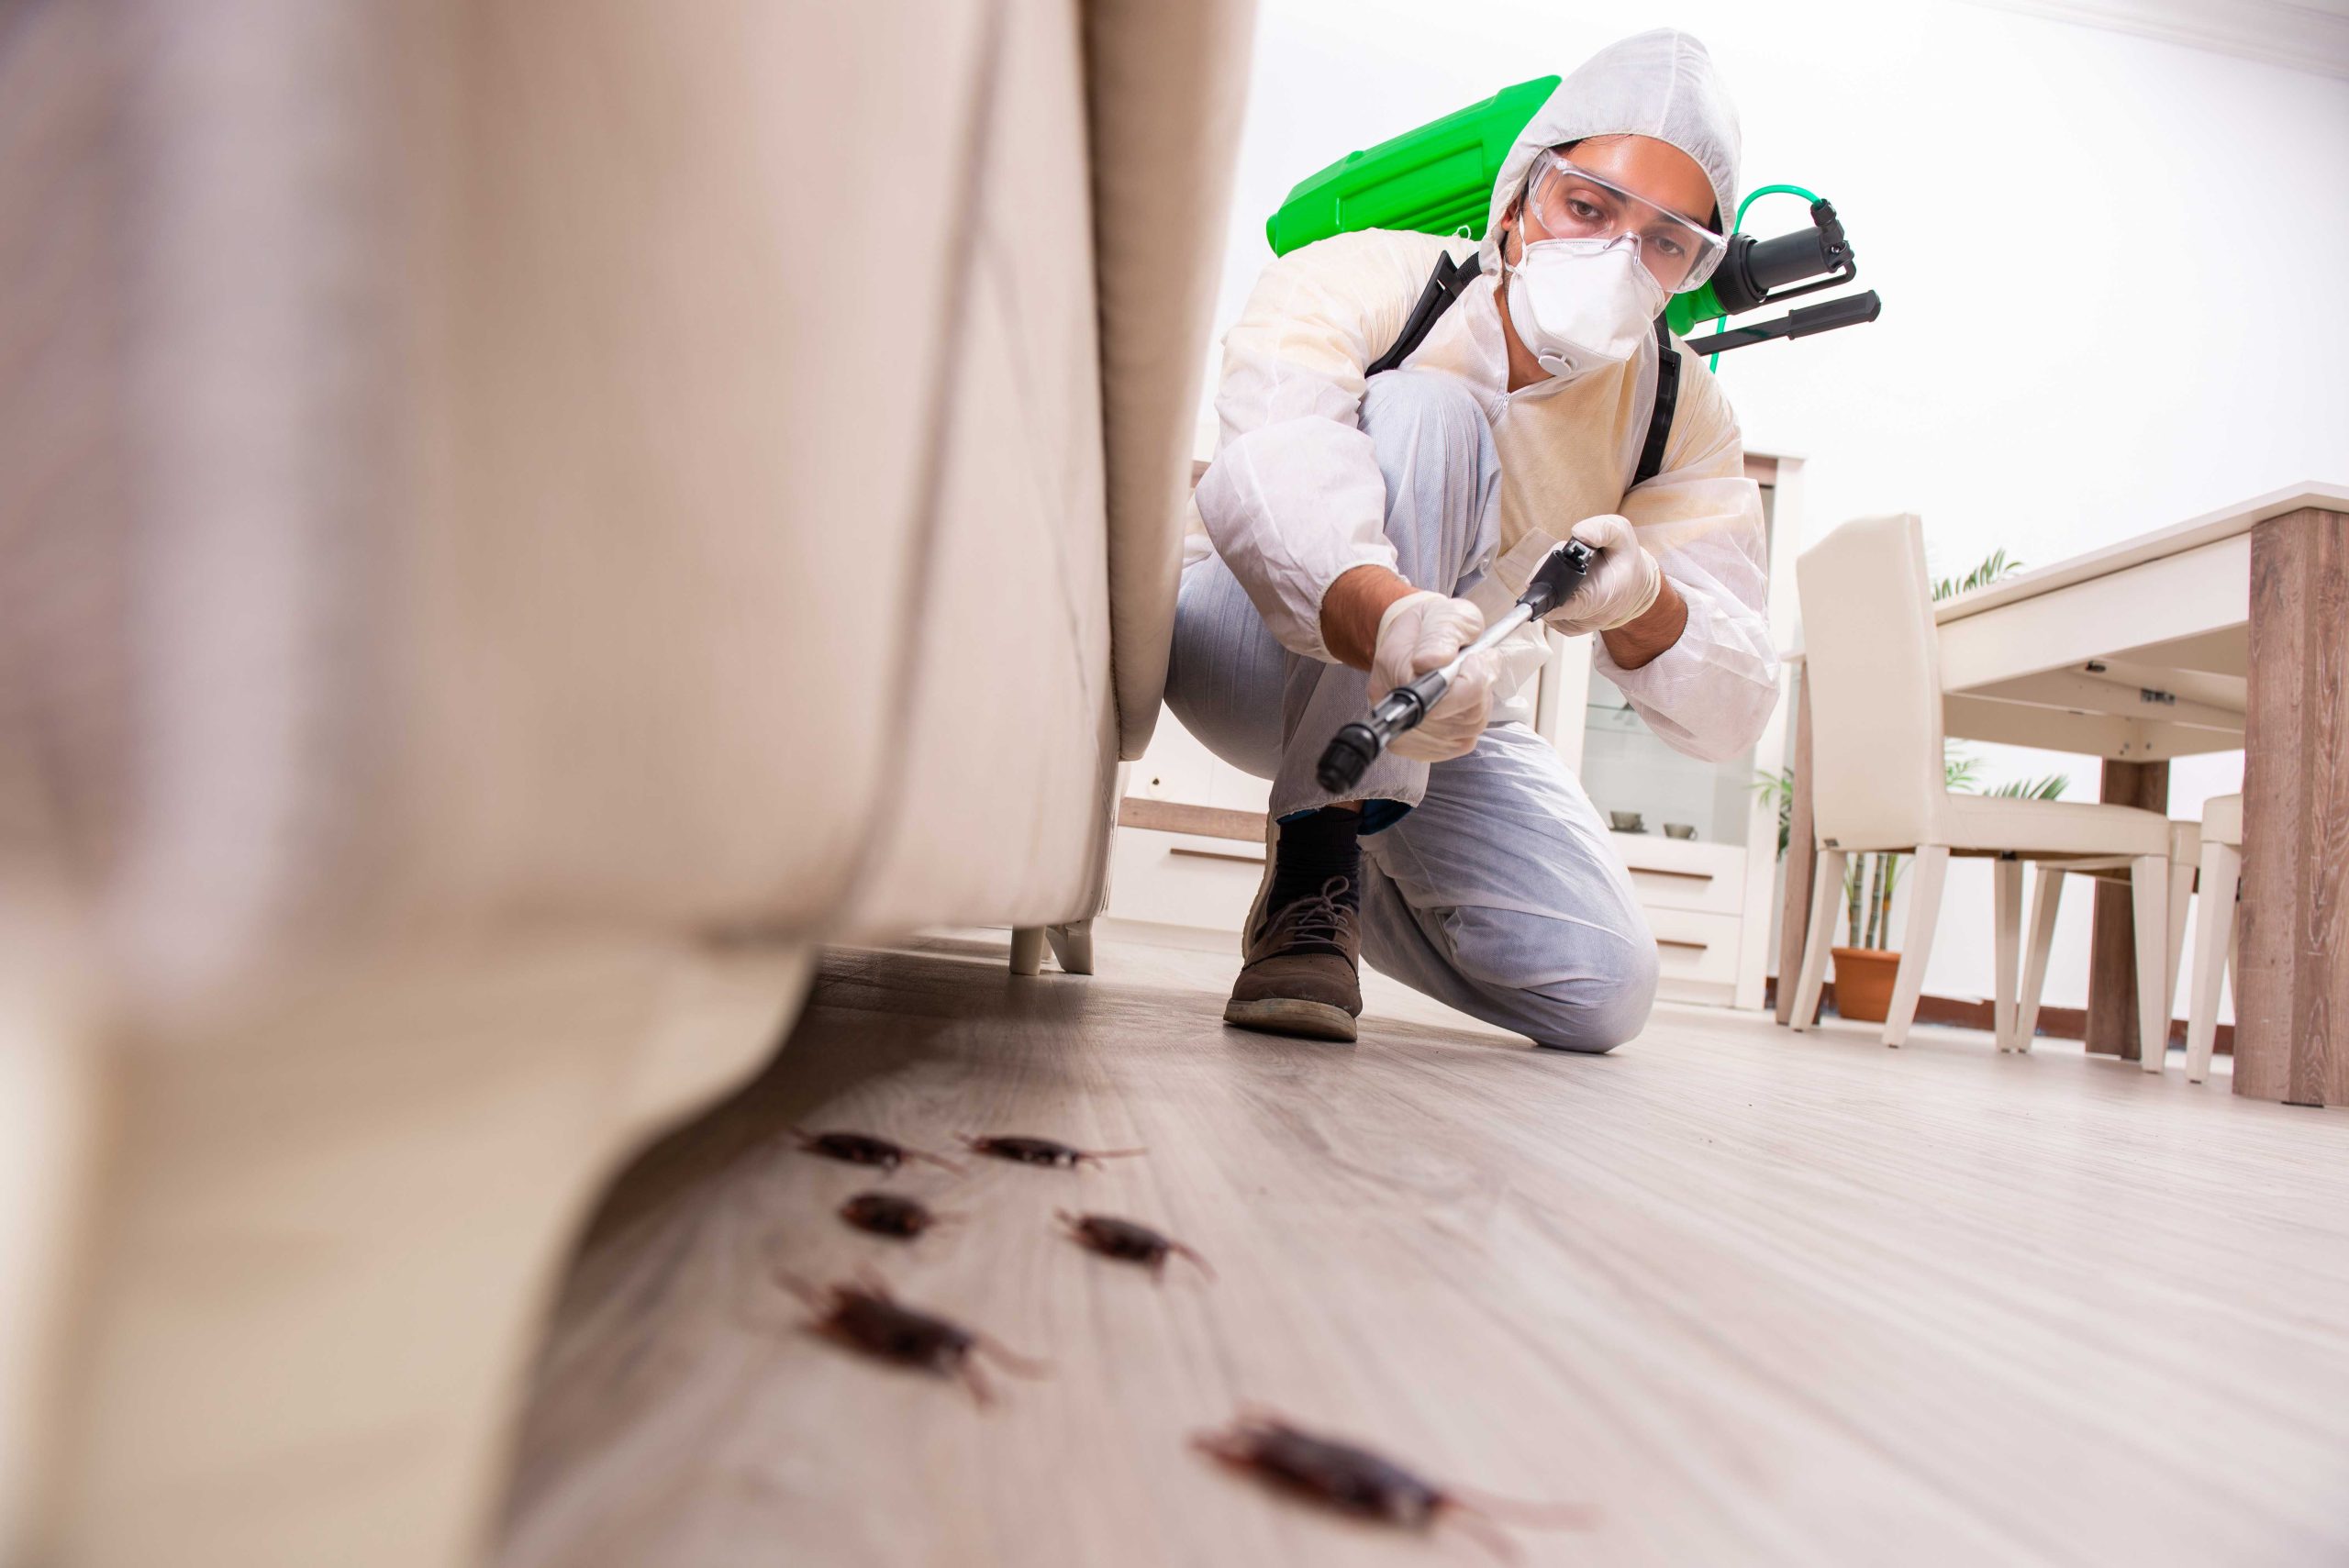 Pest-Control experts in Cary specializing in prevention and eradication of various pests. Don't let pests damage your property and endanger your health.